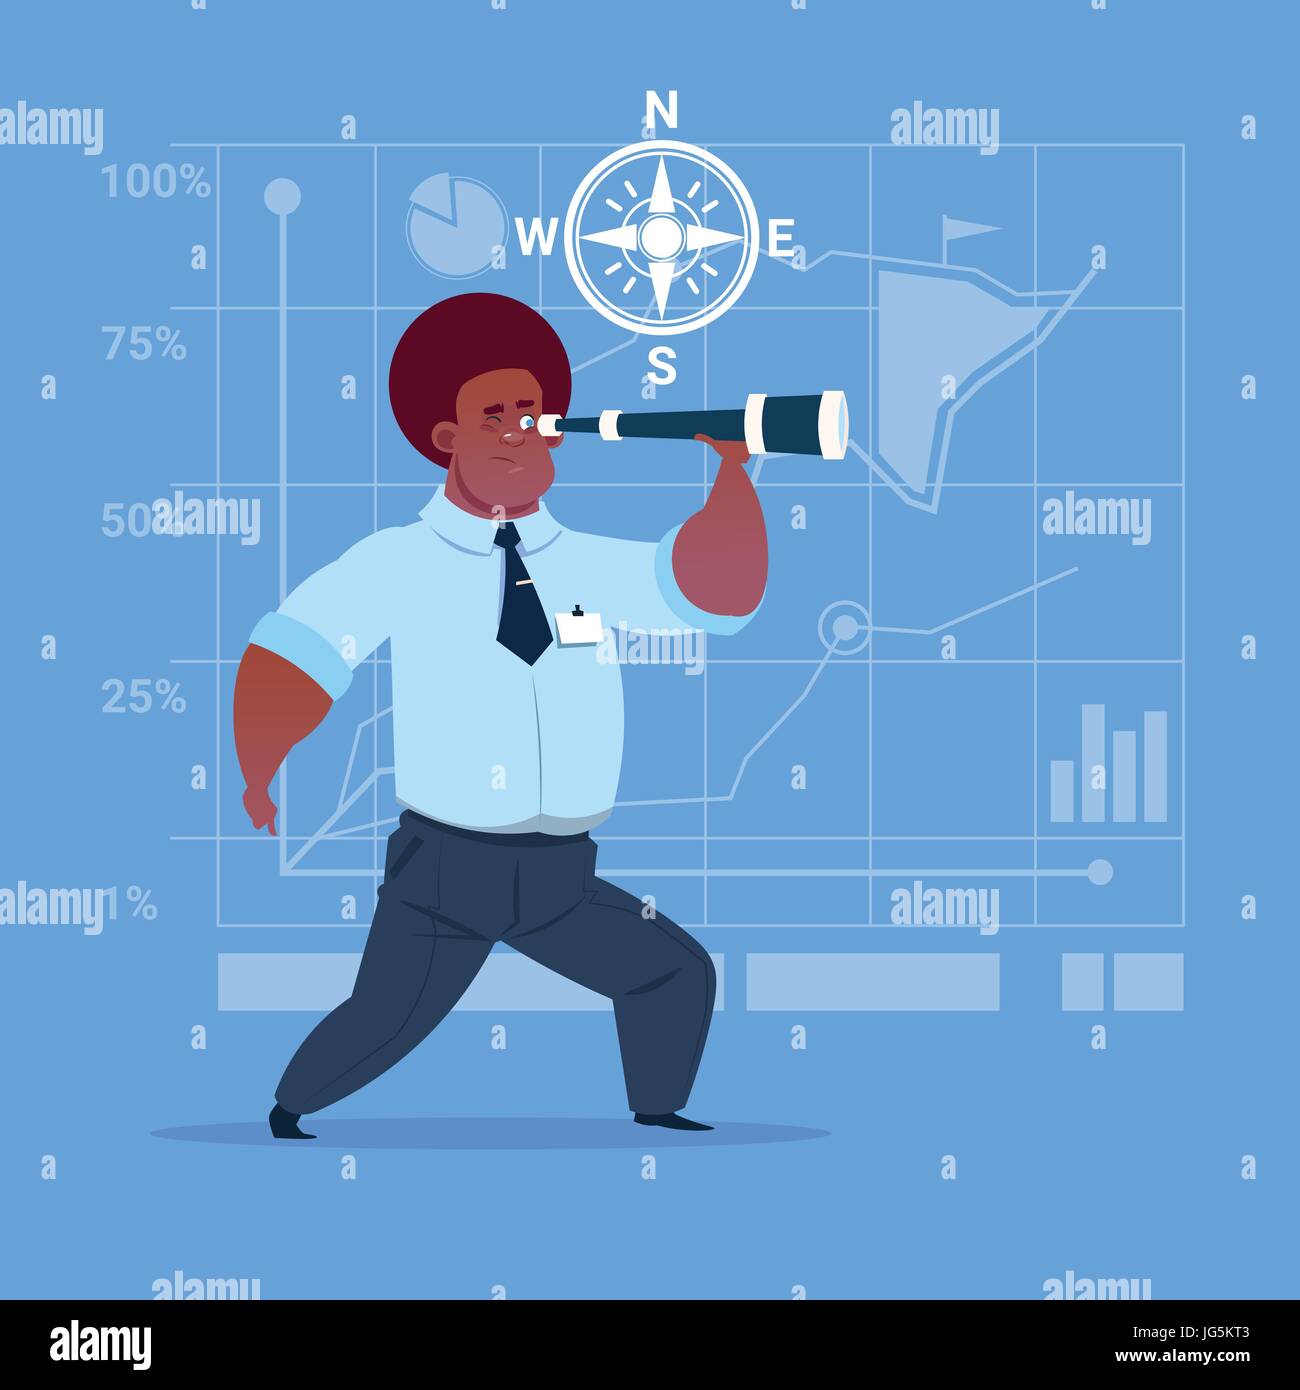 African American Business Man With Binoculars Successful Future Career Concept Stock Vector